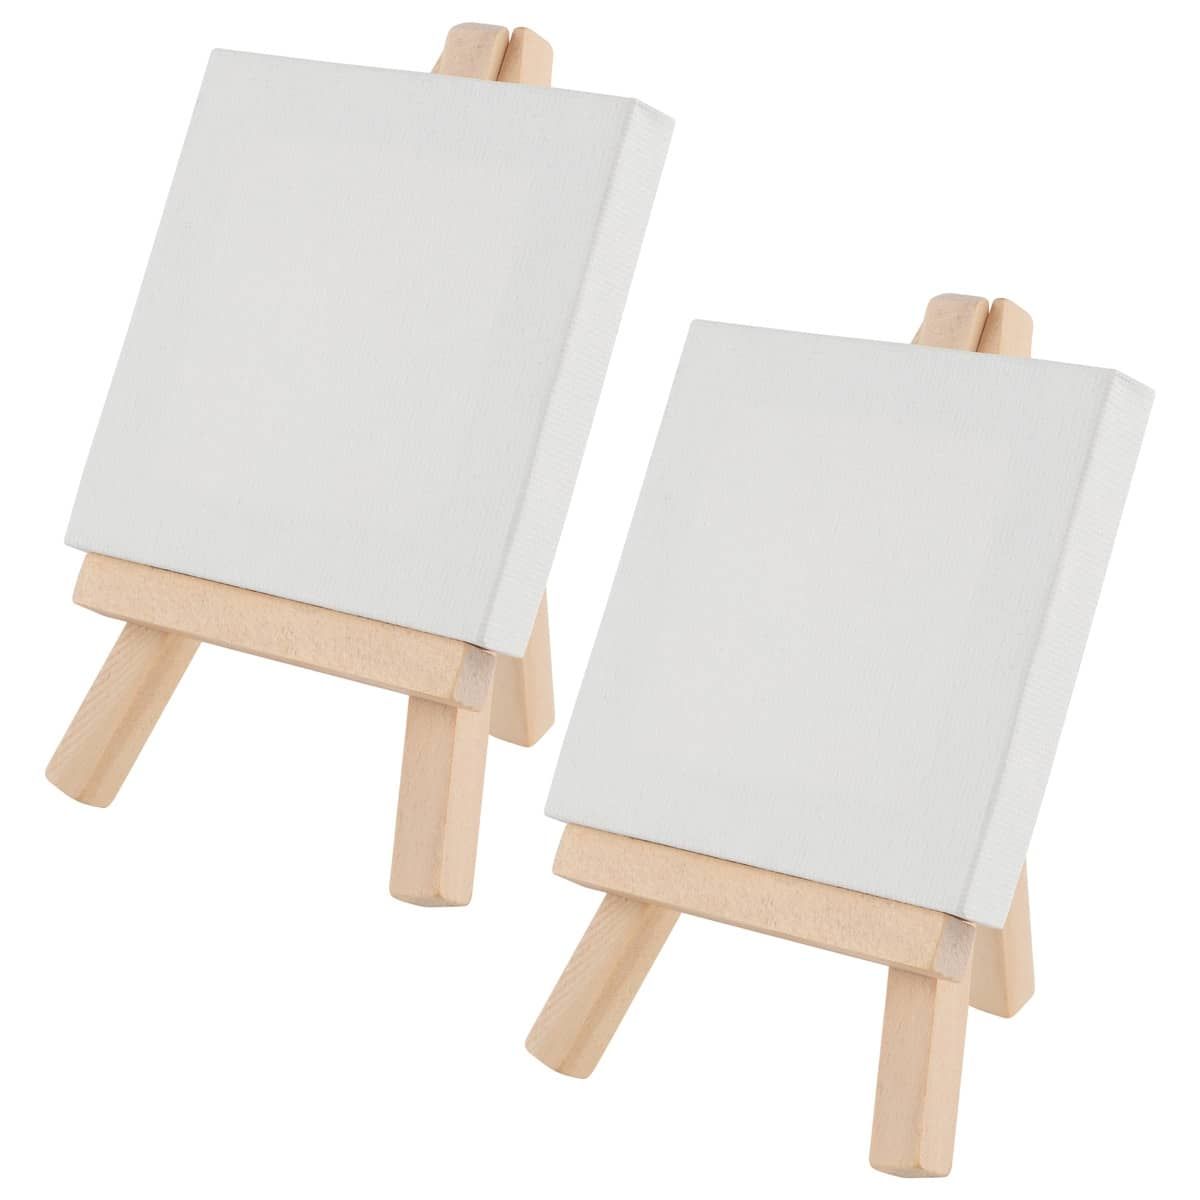 Mini Stretched Canvas Easel Set- Bulk Pack of 5, Small Stretched